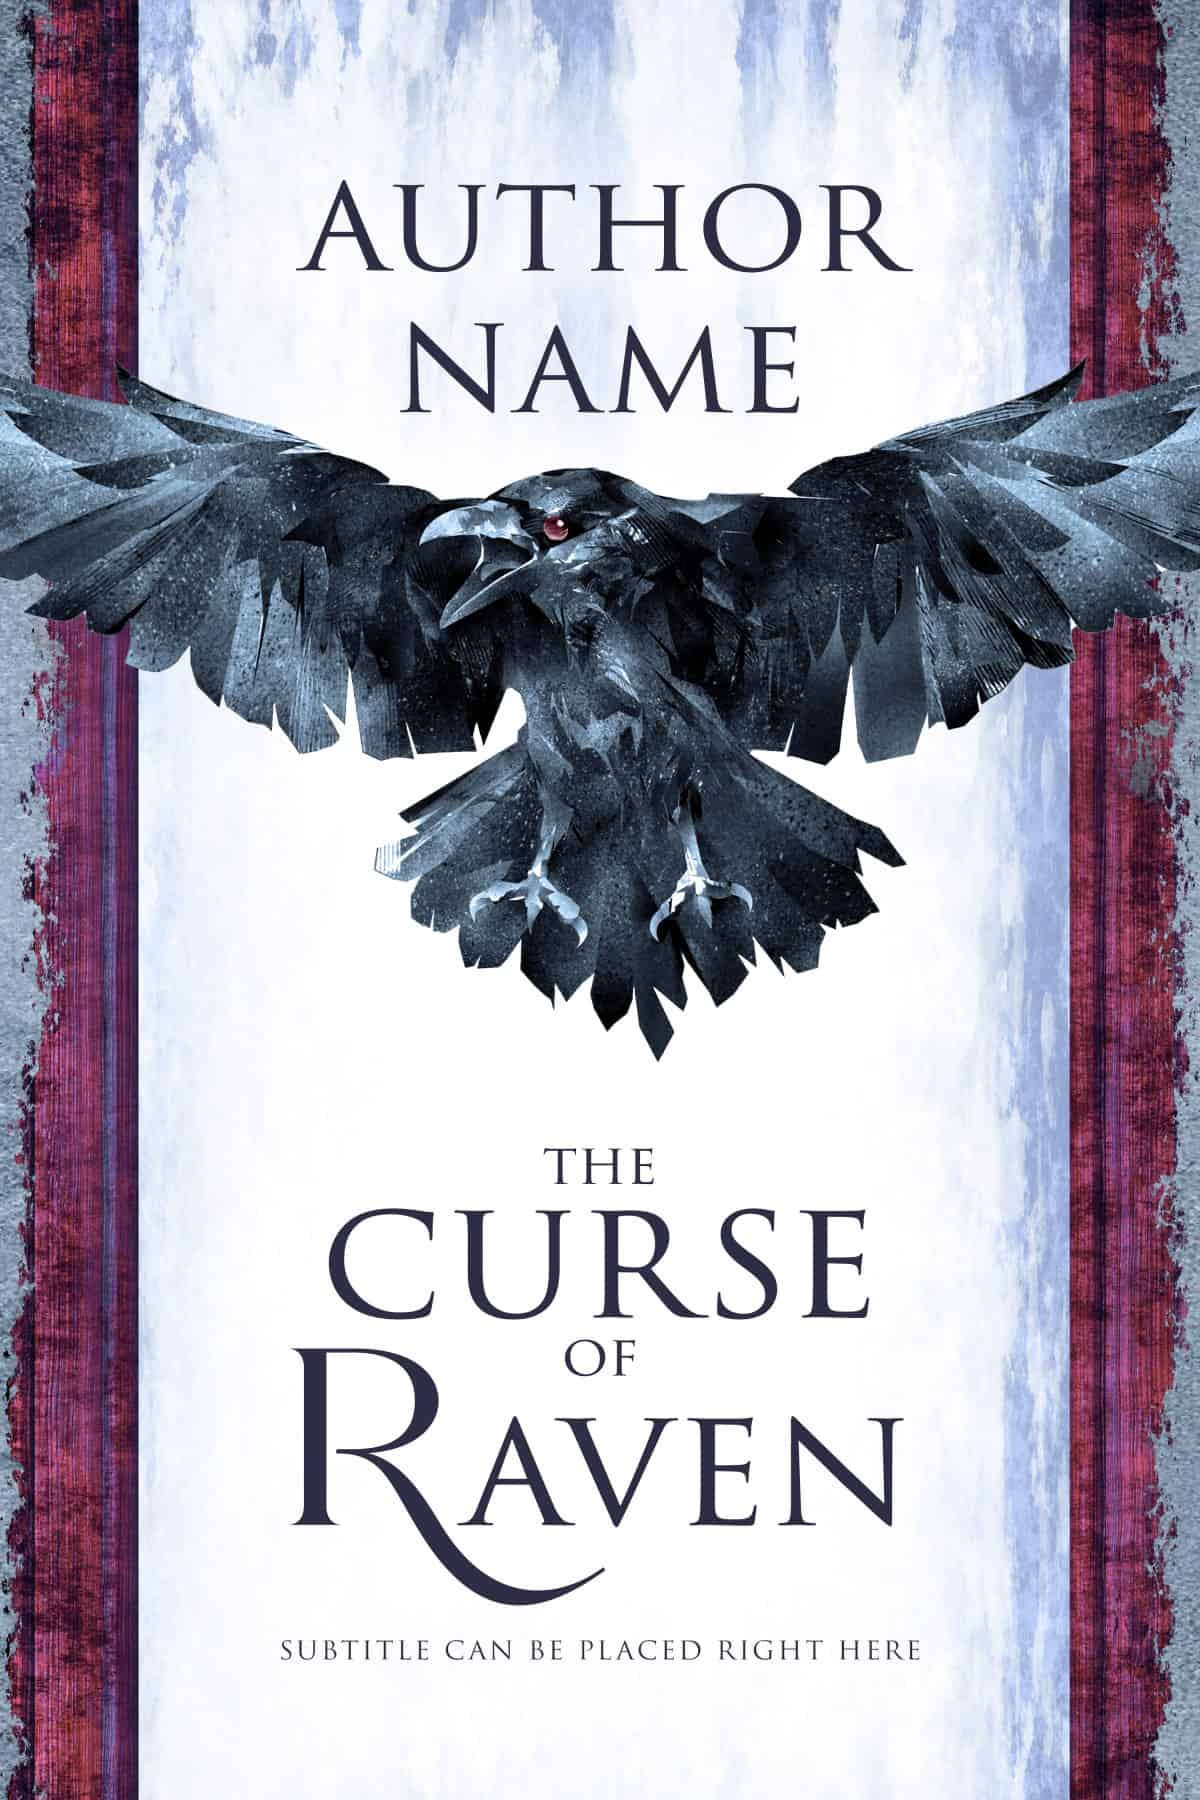 the-curse-of-raven-the-book-cover-designer